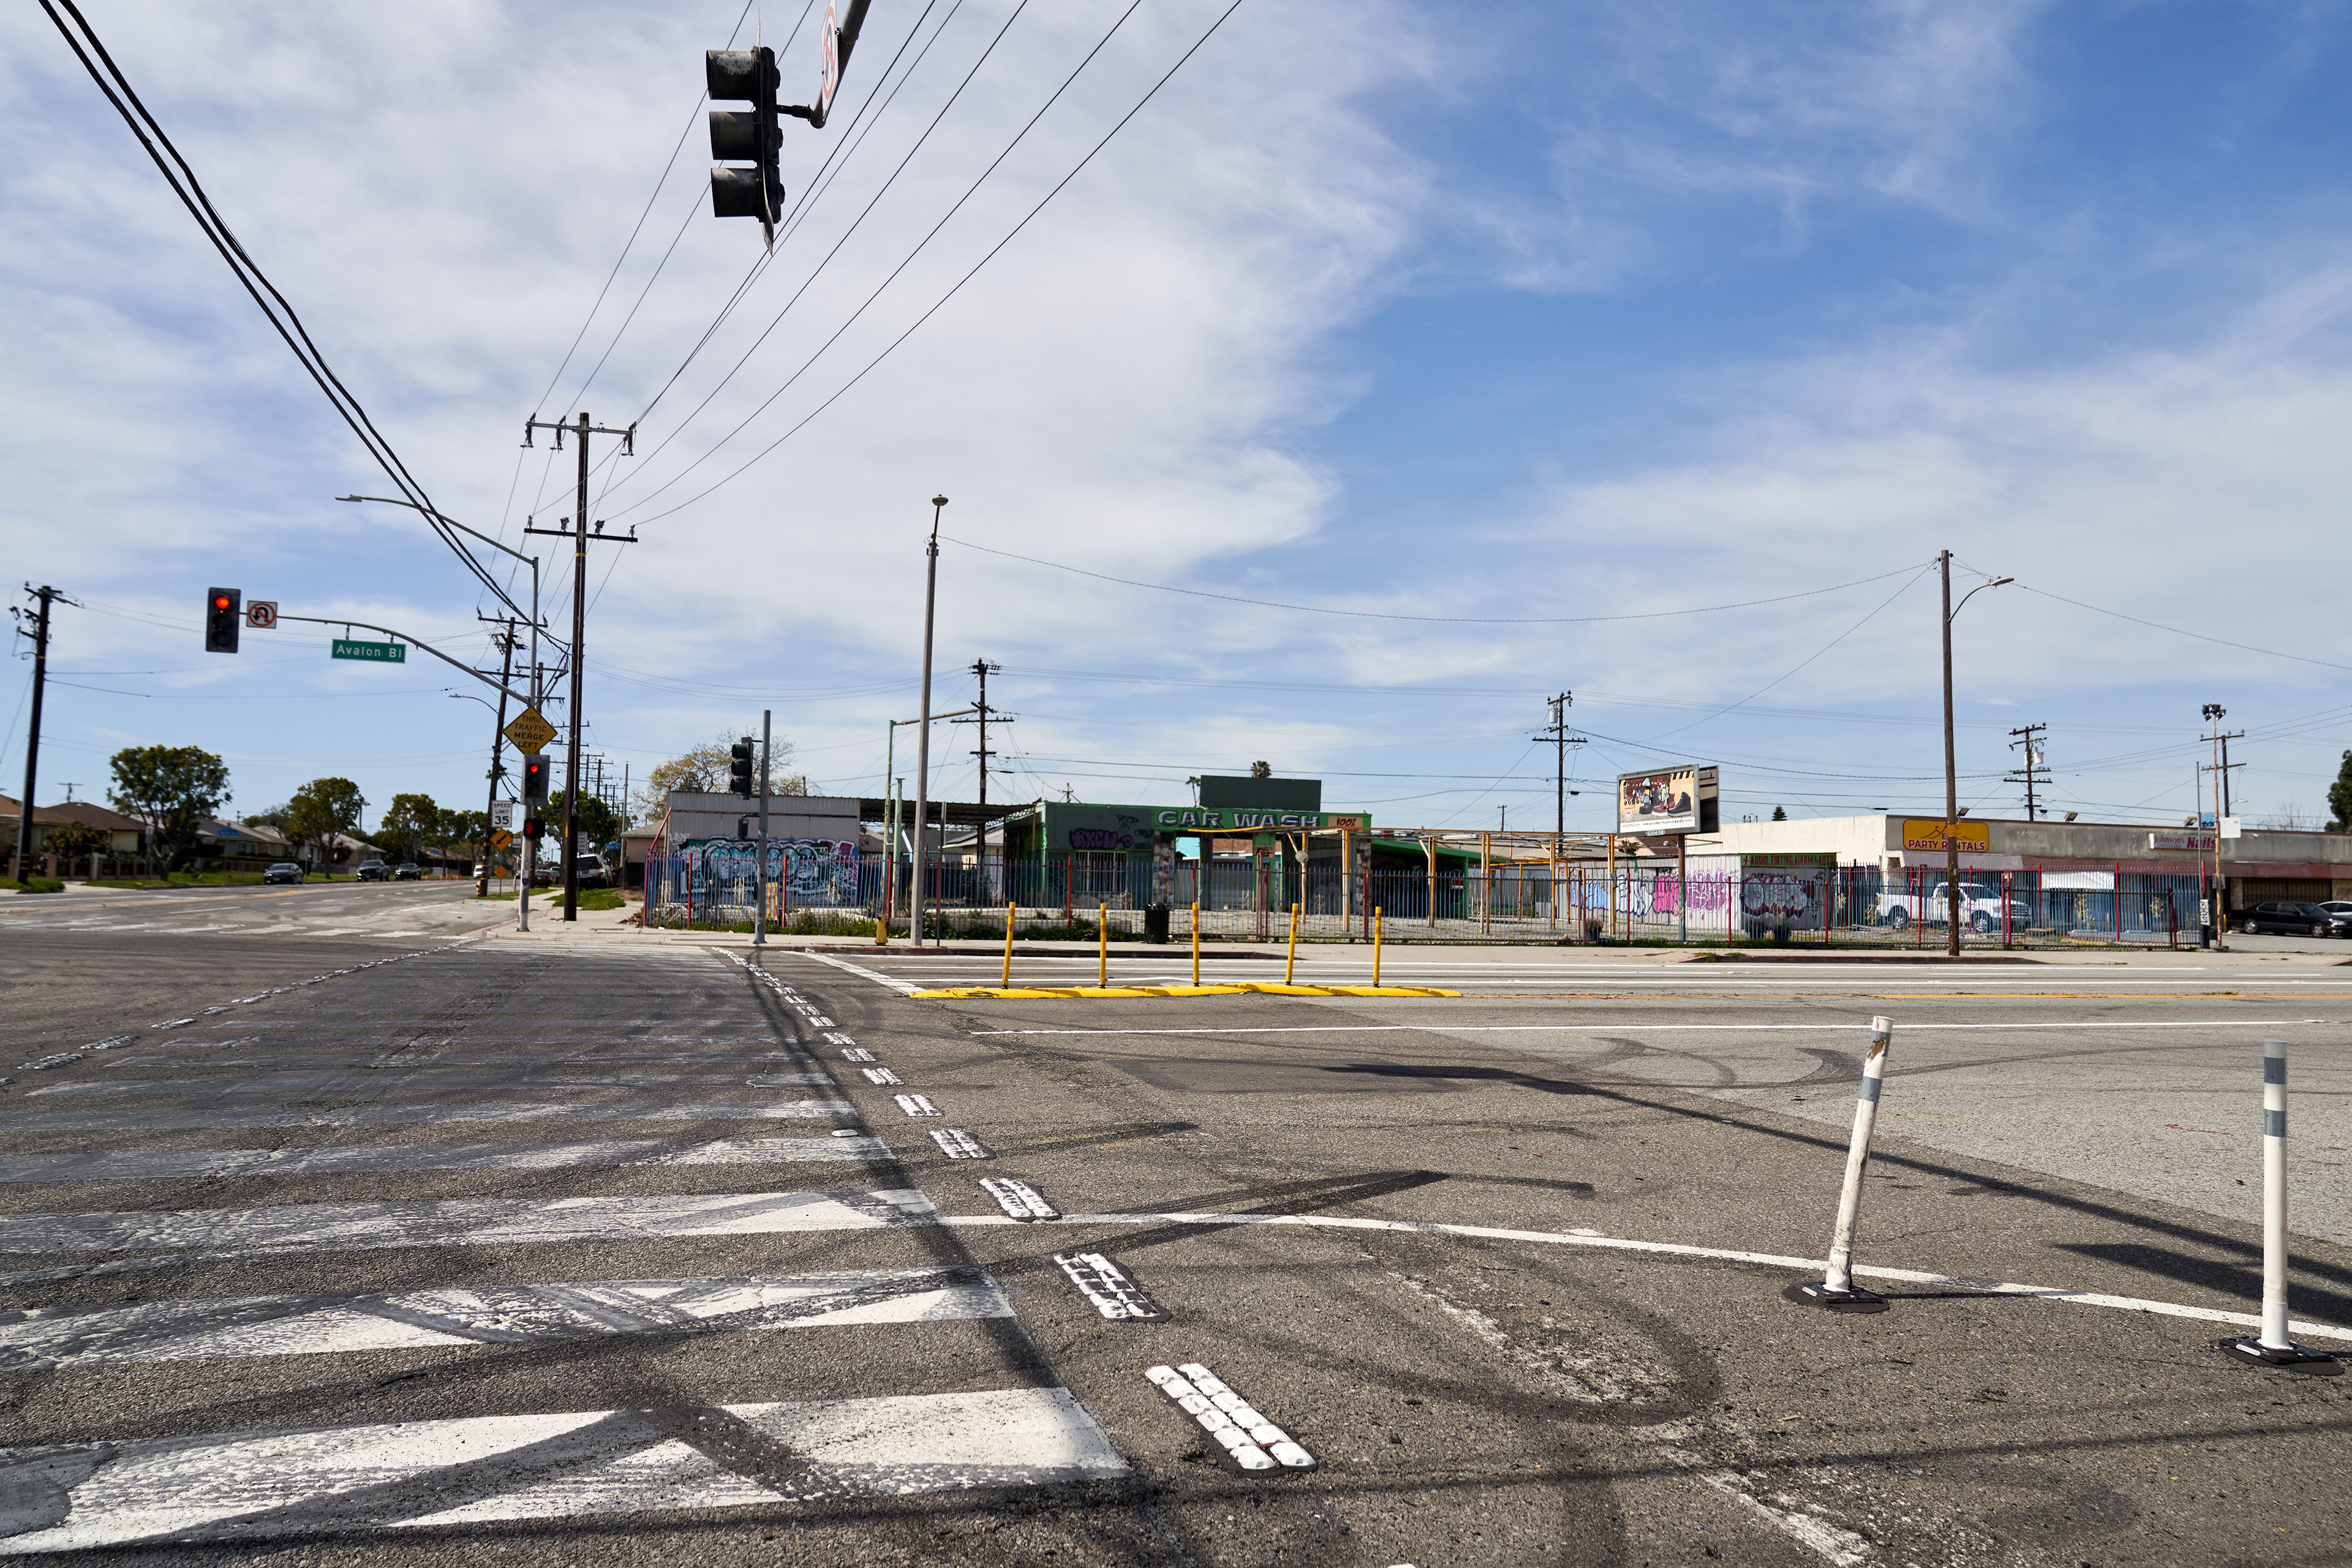 A photograph shows a large intersection. There is a crosswalk, but the painted lines are badly faded. Dark tire marks are visible on the pavement.